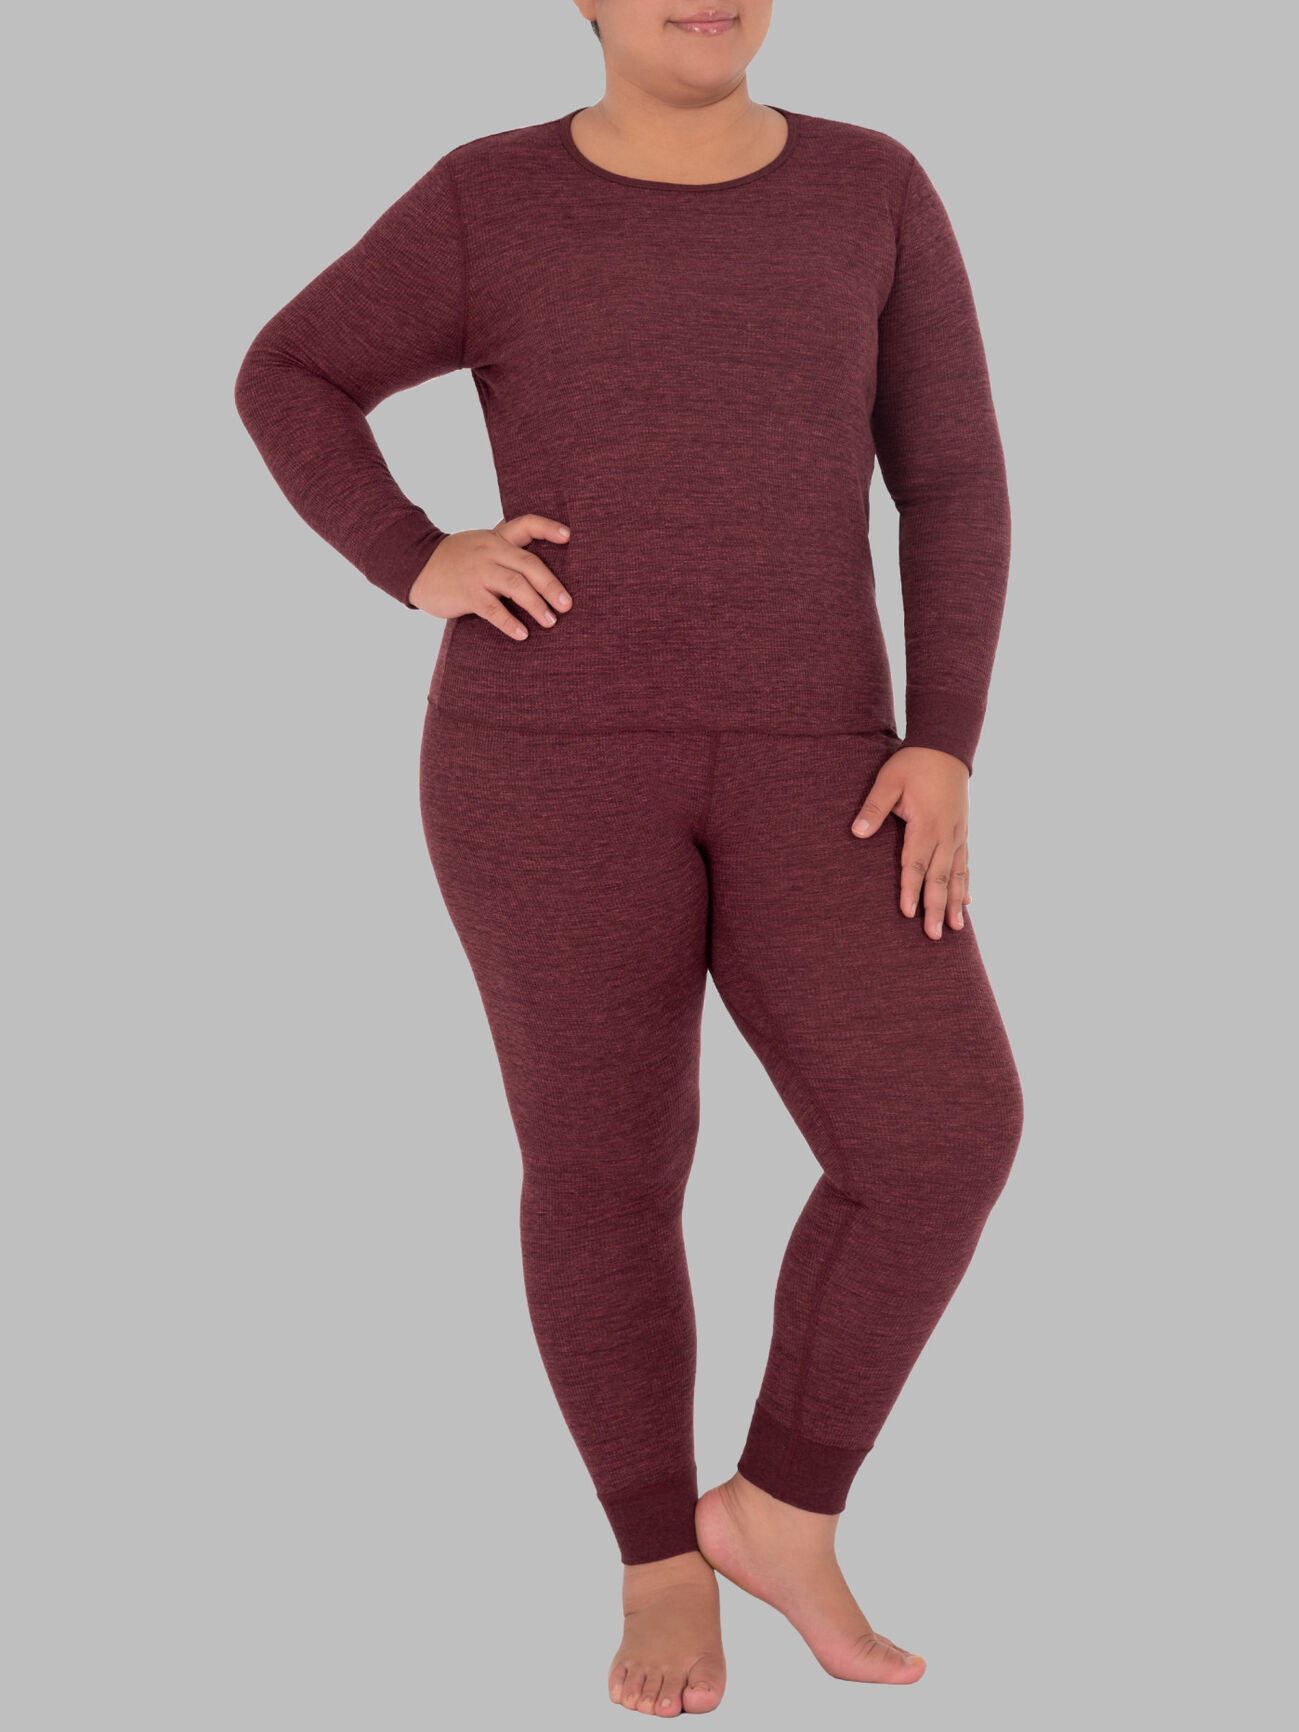 Women's Plus Size Waffle Thermal Crew Top and Bottom Set MERLOT INJECTION HEATHER/ MERLOT INJECTION HEATHER